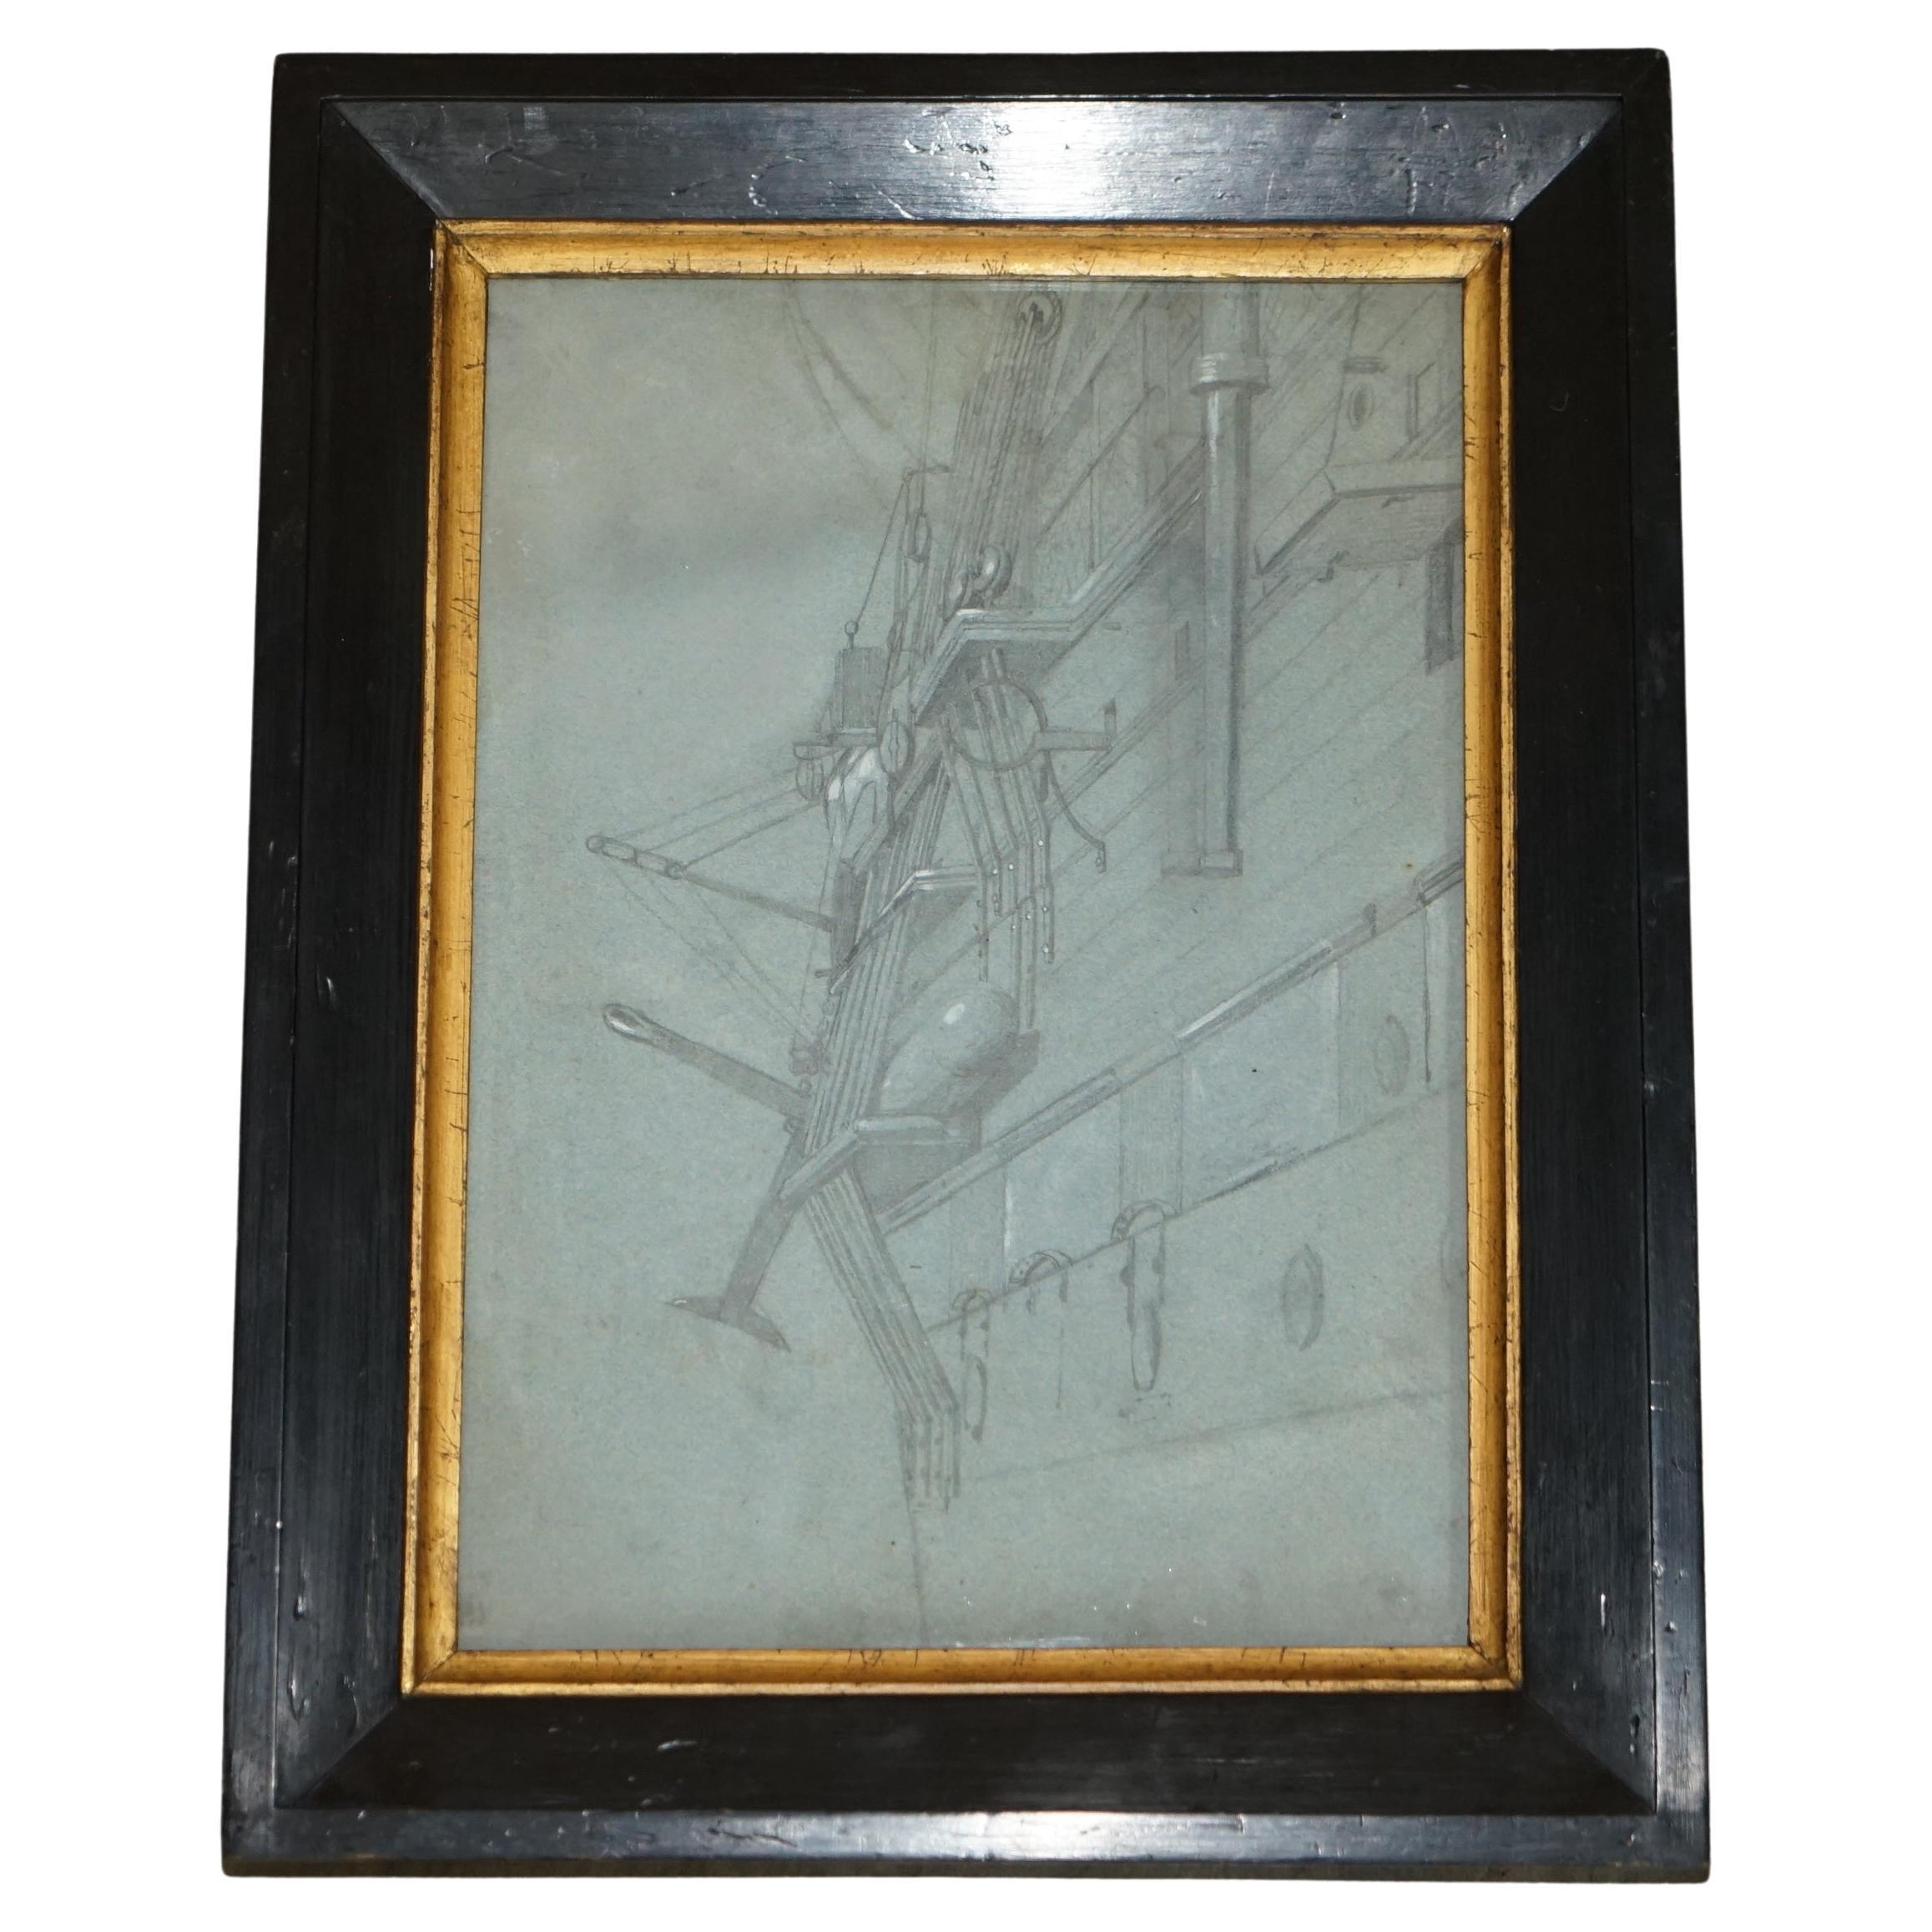 Very Fine circa 1850 French School Study of the Side of a Ship in Chalk on Paper